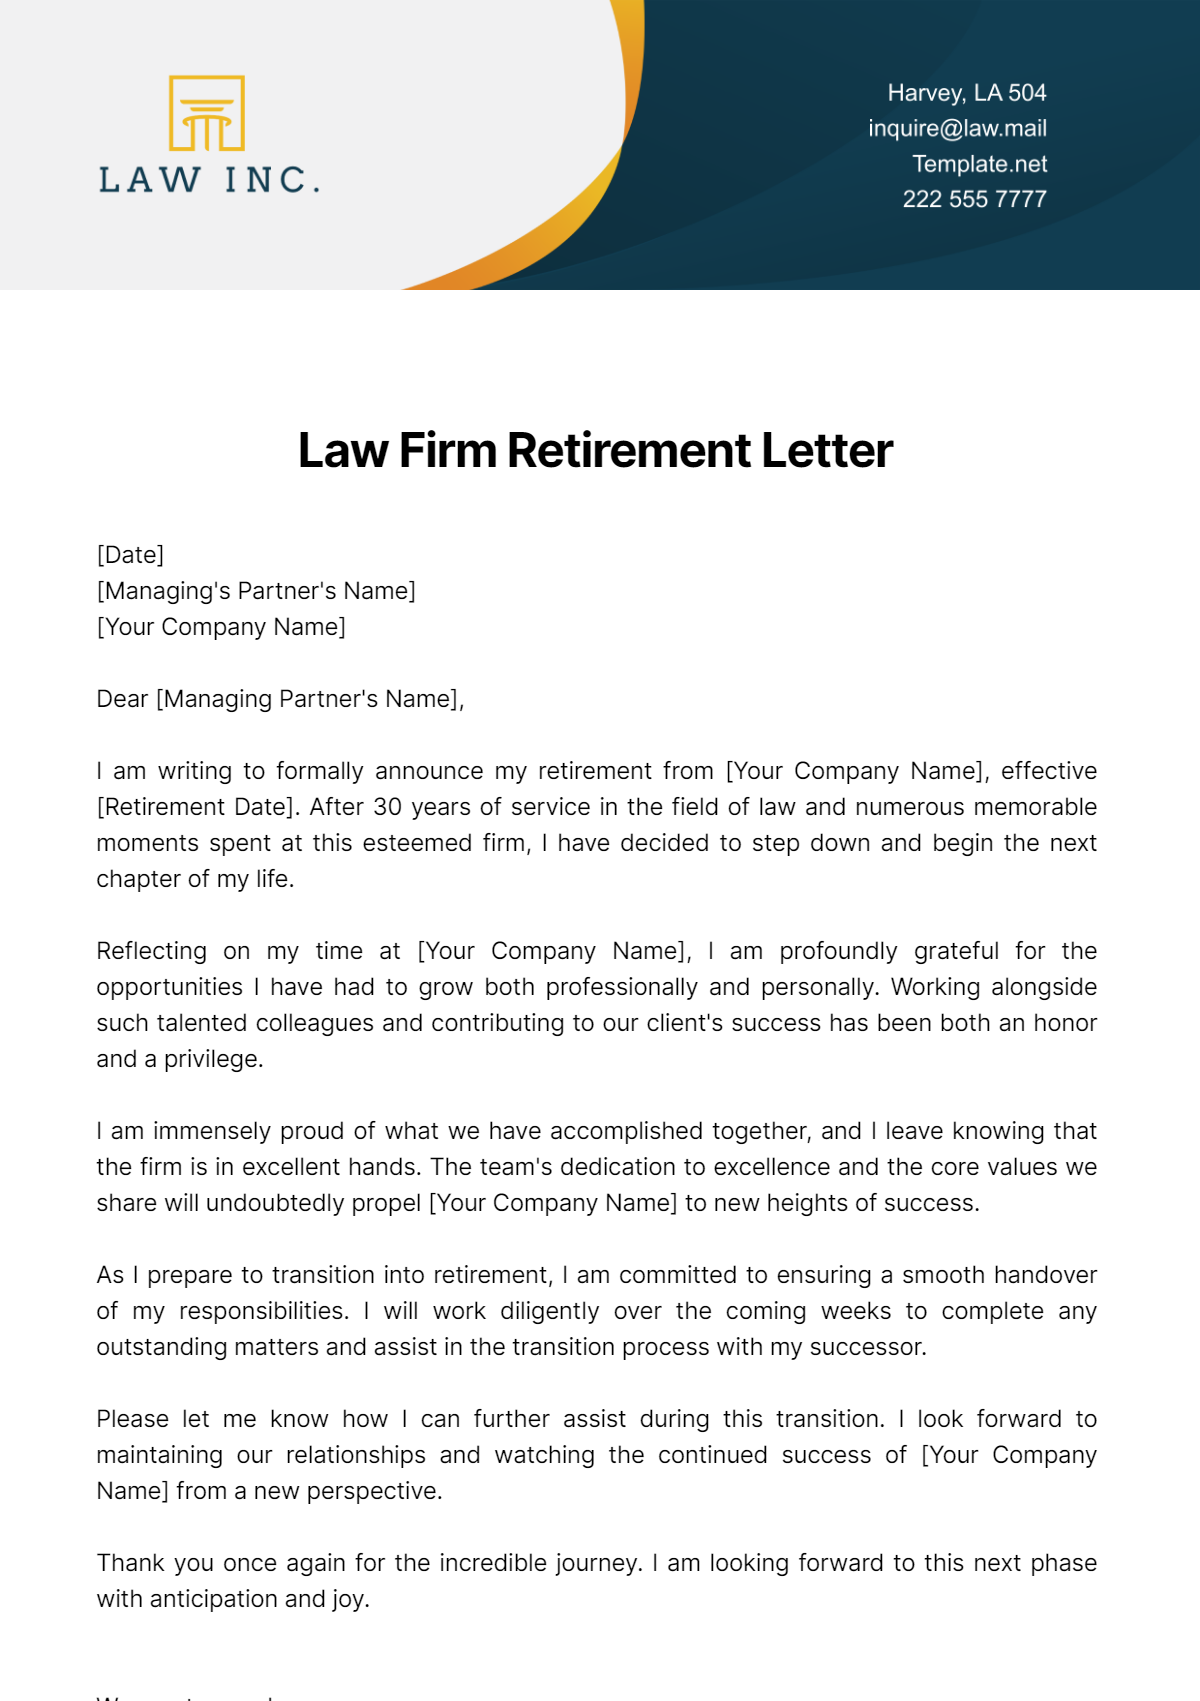 Free Law Firm Retirement Letter Template